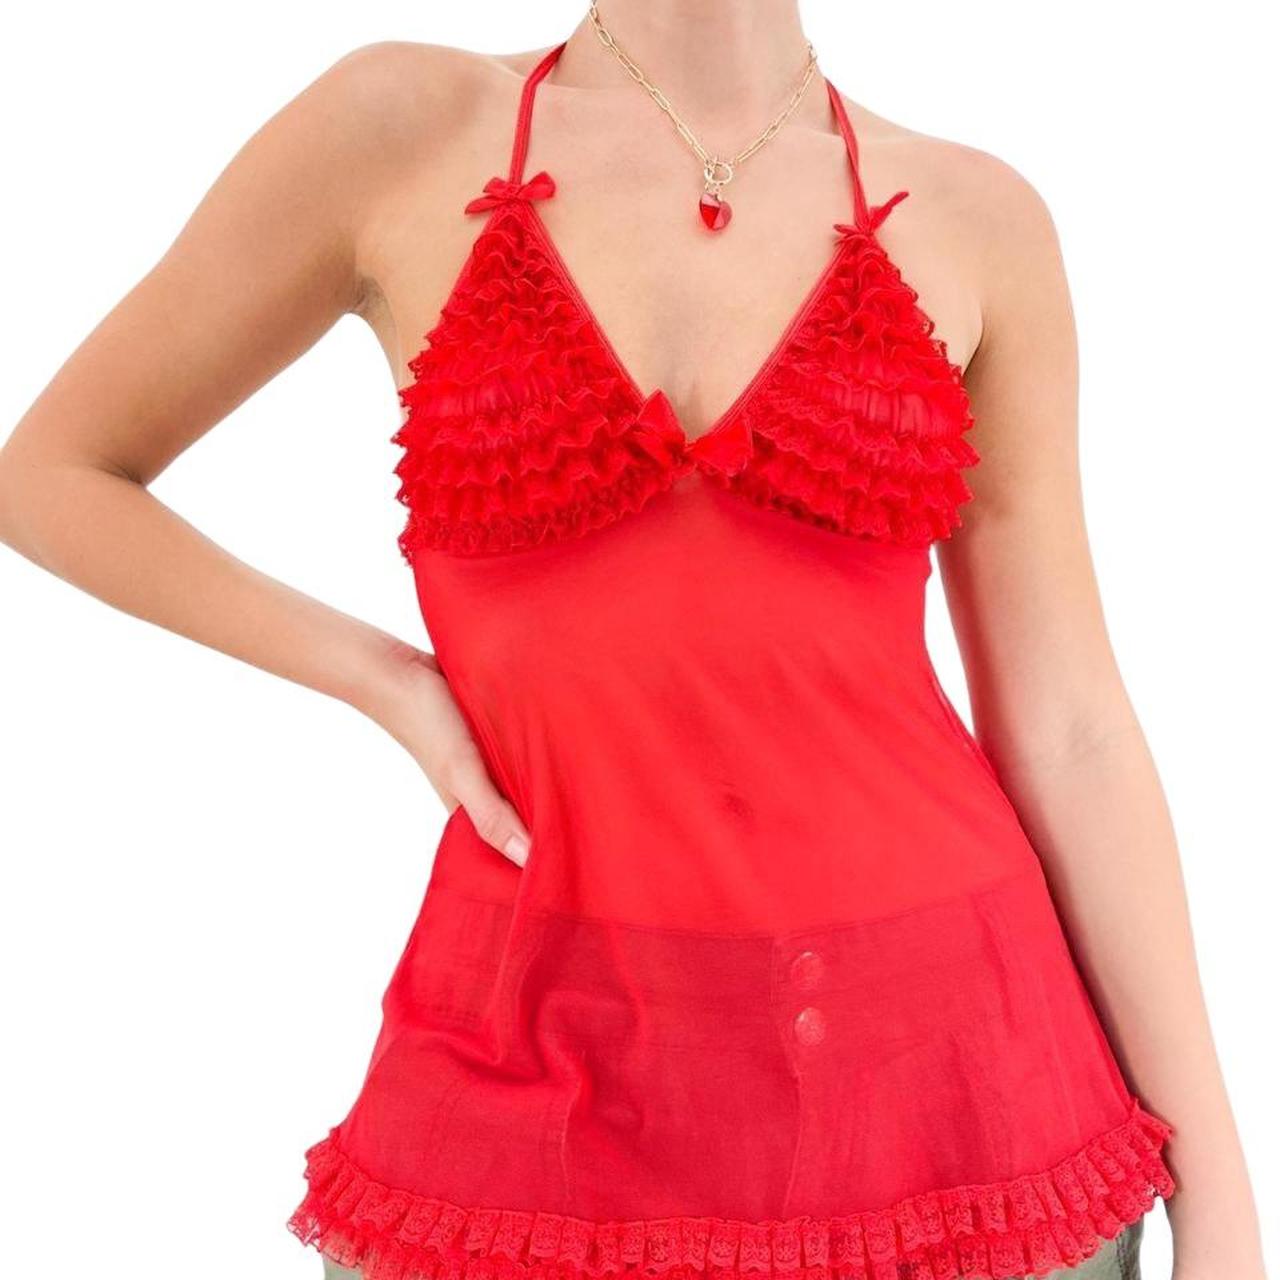 Y2k Vintage Red Mesh Halter Top w/ Floral Lace Ruffle Layers [S]